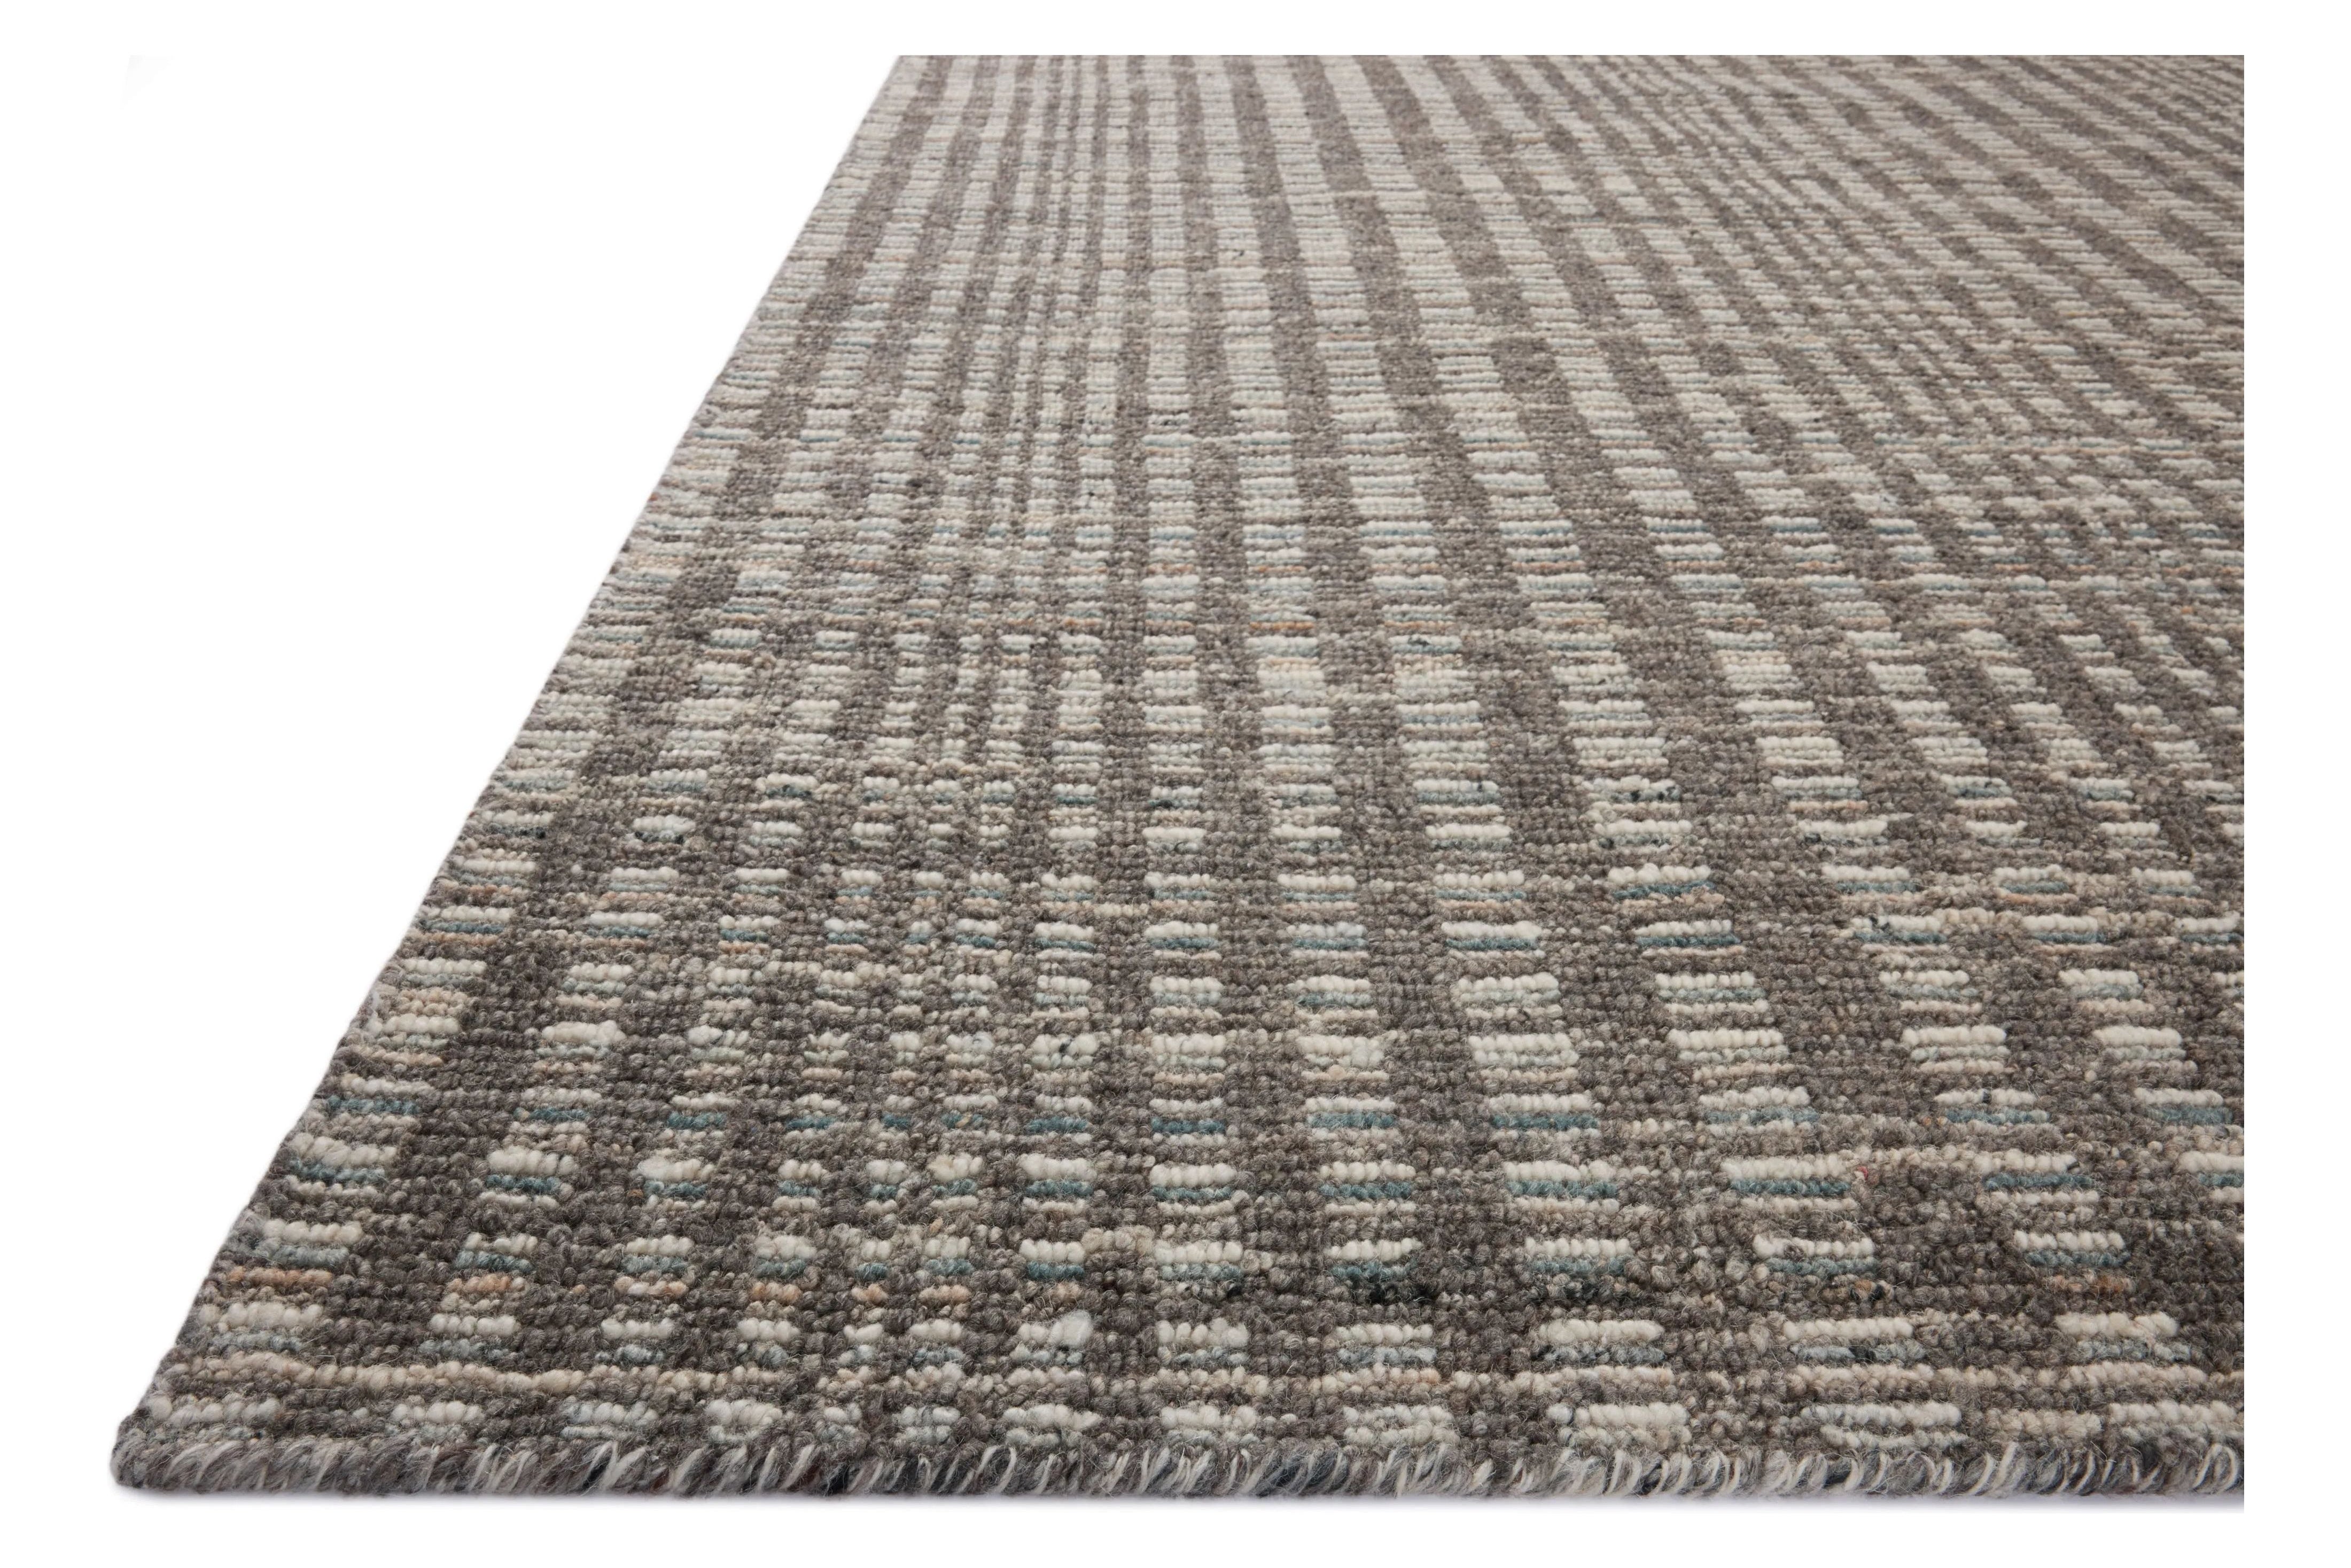 The Sonya Granite / Multi Rug is a hand-loomed area rug with a light, airy palette and understated graphic design. The rug’s textural pile is a soft blend of wool and nylon that creates dimension in living rooms, bedrooms, and more. Amethyst Home provides interior design, new home construction design consulting, vintage area rugs, and lighting in the Winter Garden metro area.